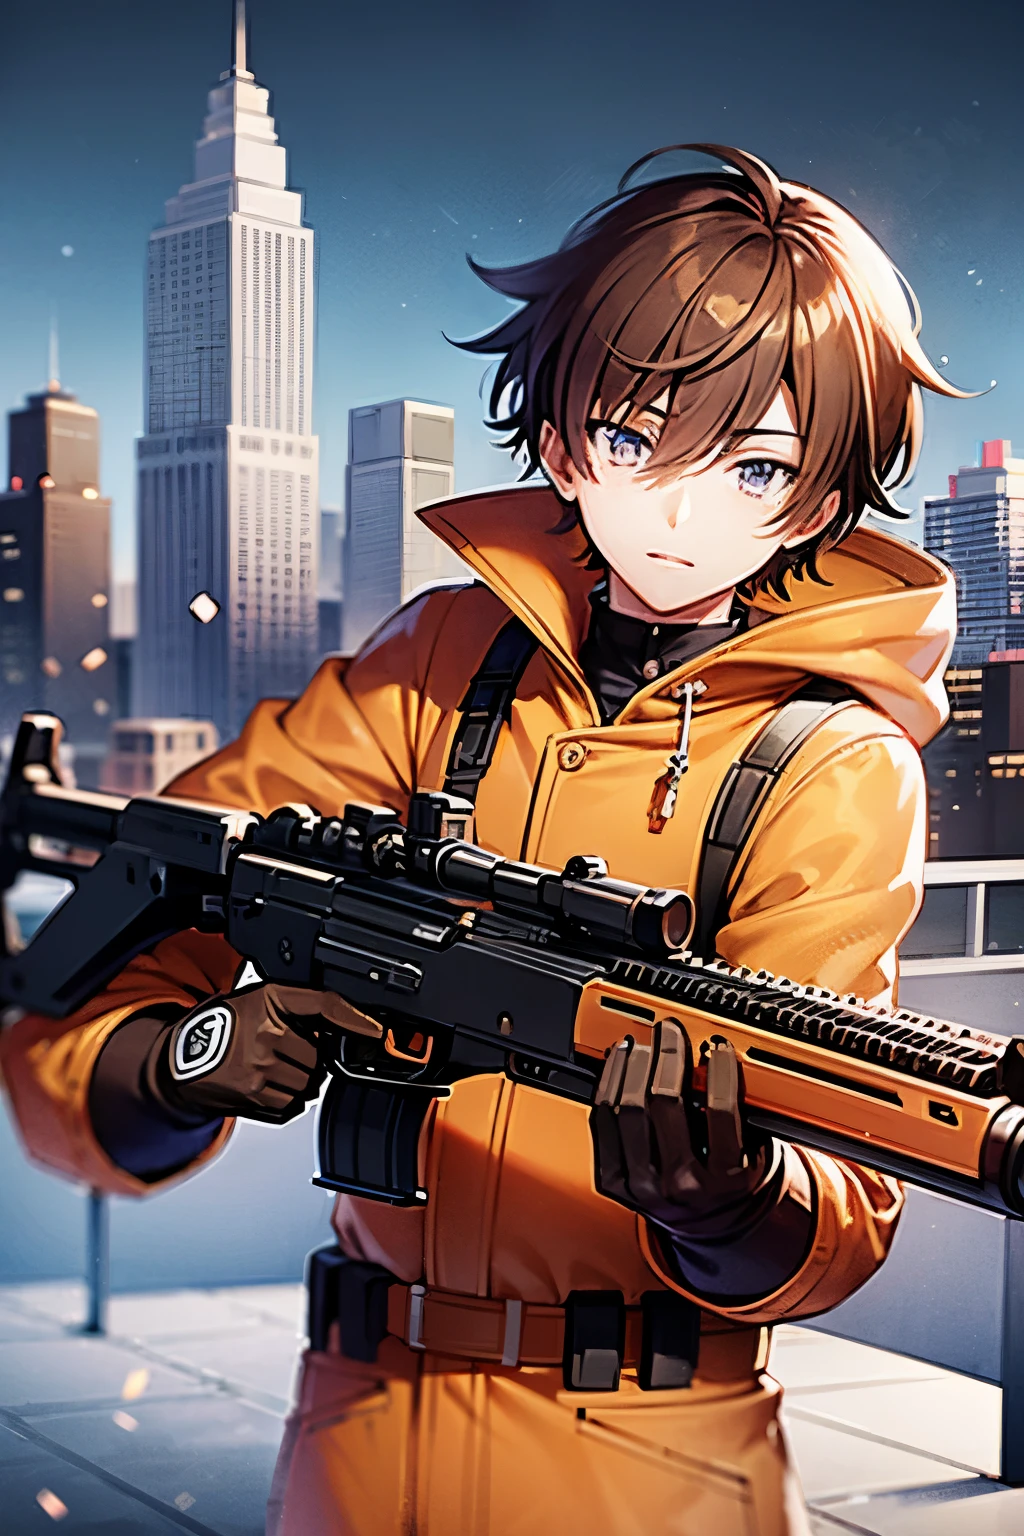 anime, anime style, fate style, young man, orange coat, rifle with acog, taking cover, in a shootout, brown hair, blue eyes, snowy city, masterpiece
